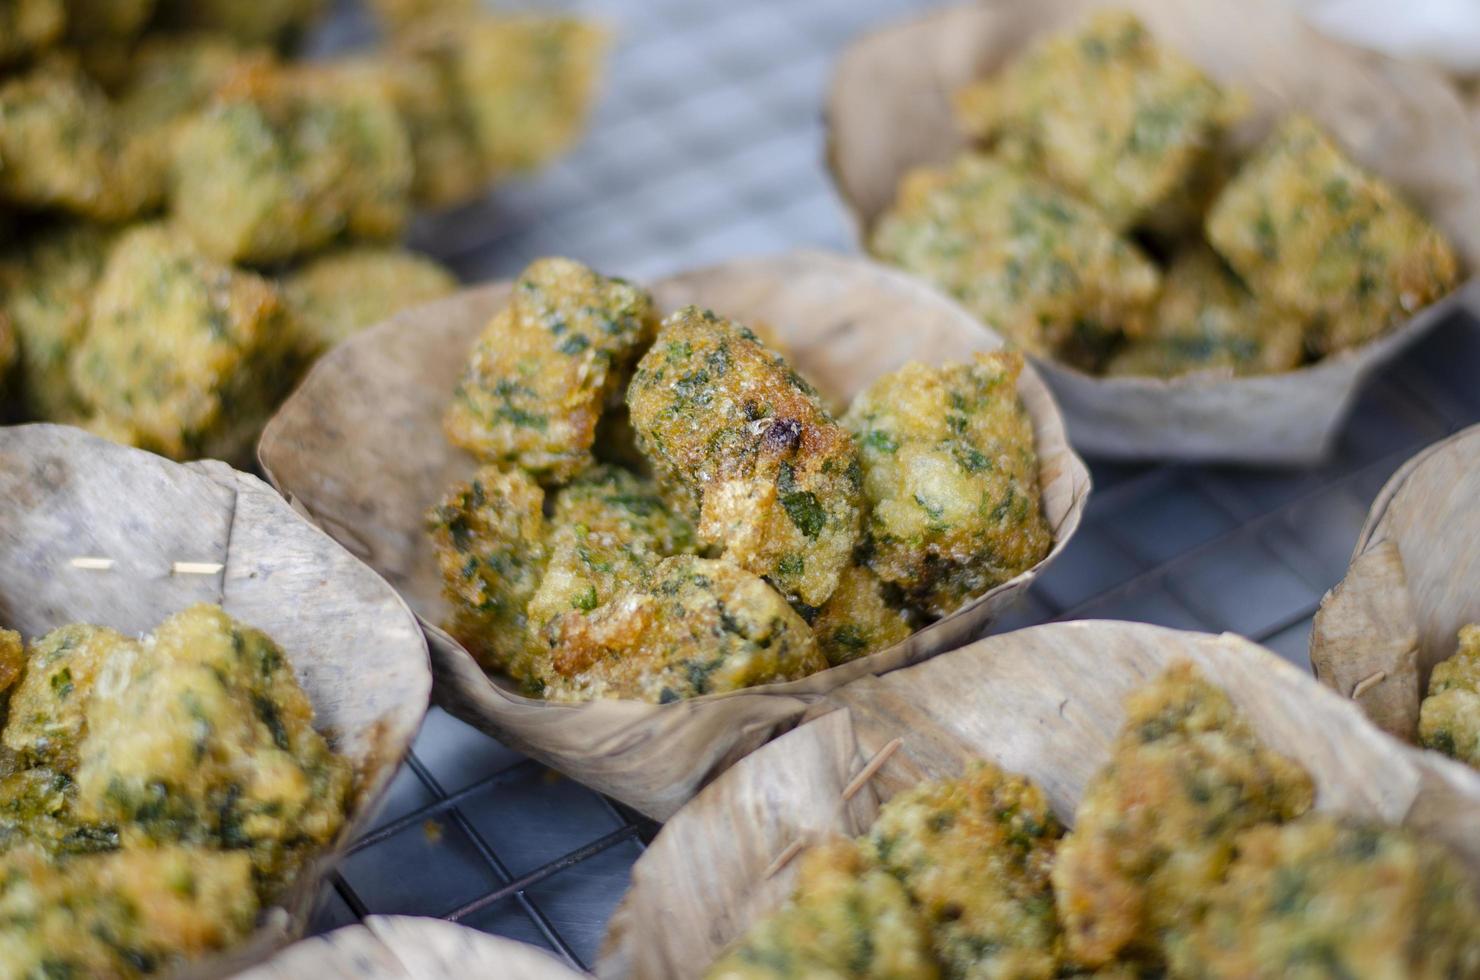 Garlic Chives Cakes on banana leaves, Asian style food photo